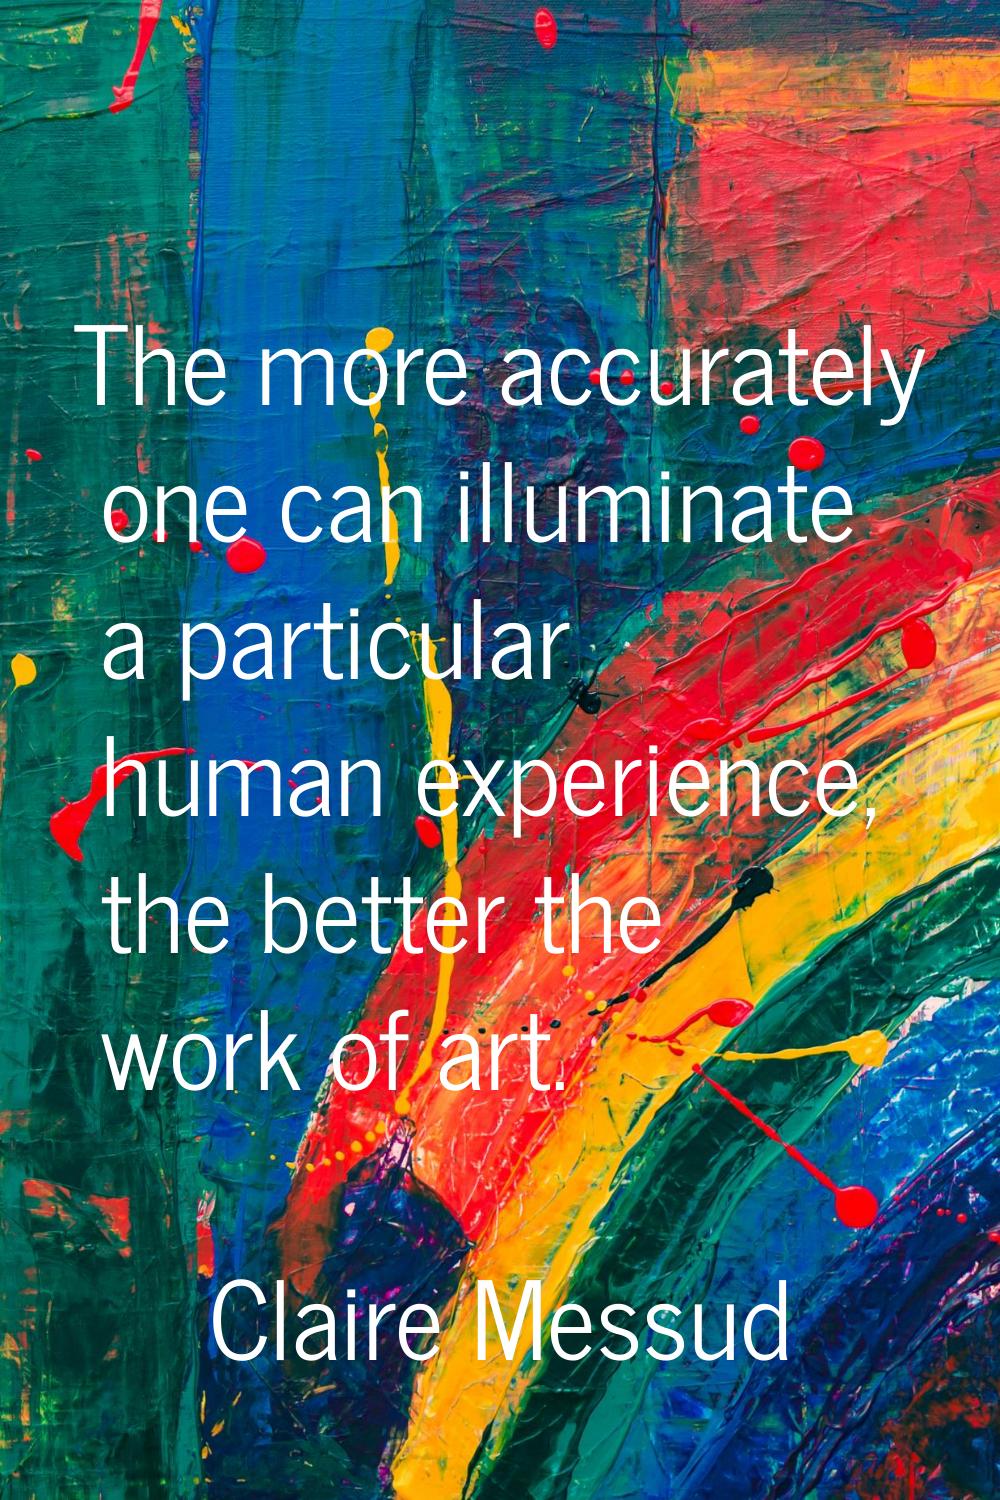 The more accurately one can illuminate a particular human experience, the better the work of art.